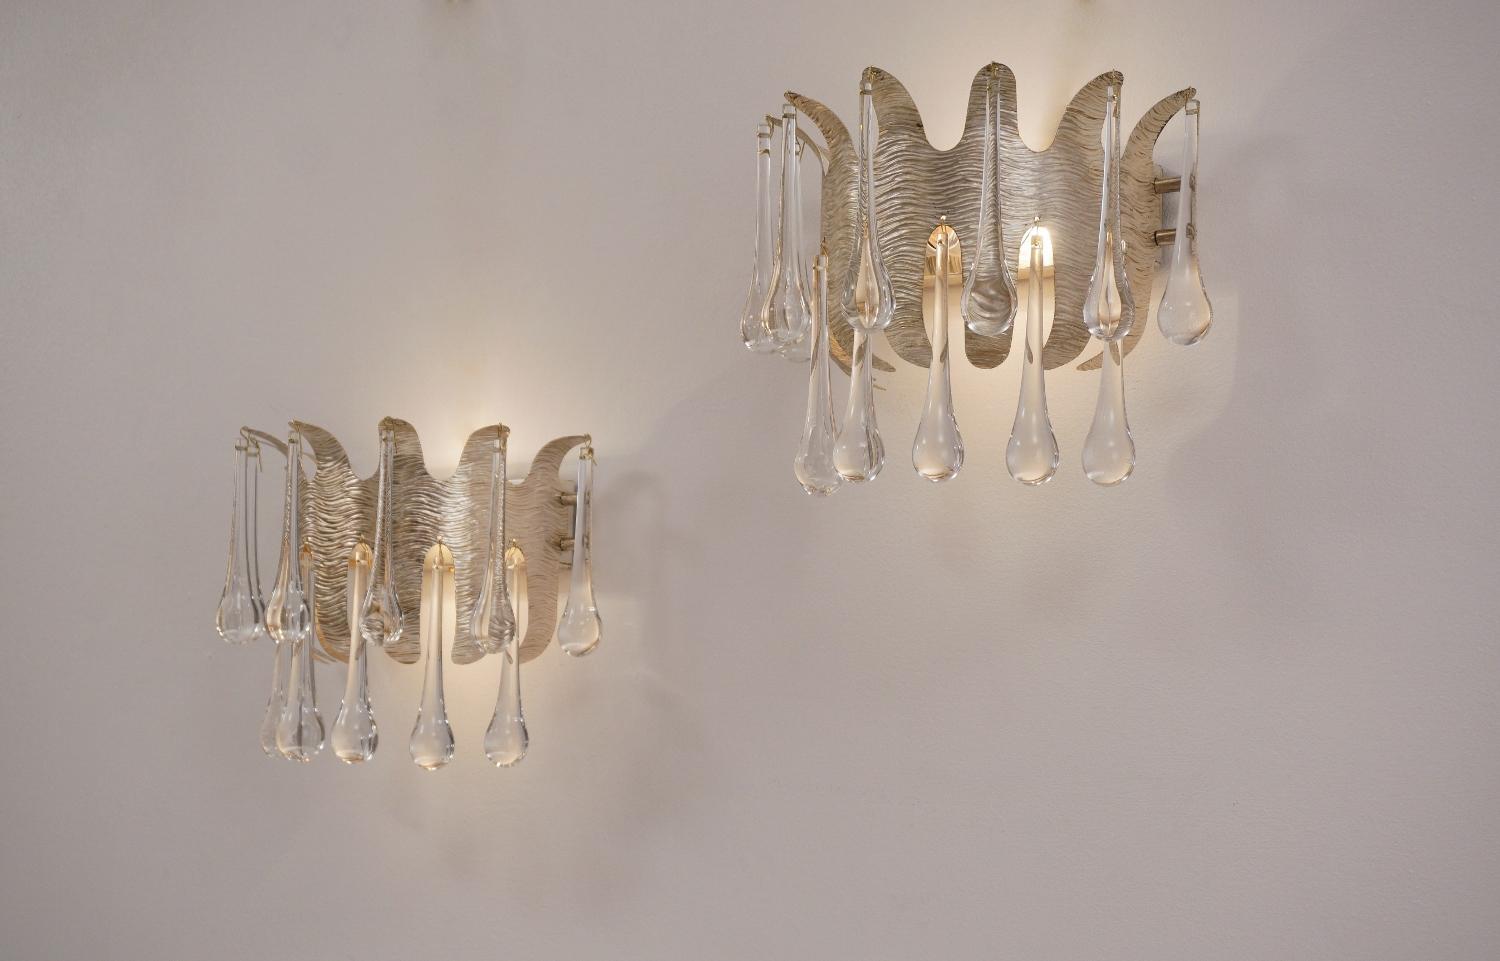 Ernst Palme wall lights for Palwa, a pair with silver plated frames & 26 crystals, 1960s, German.

This pair of wall lights has been thoroughly cleaned respecting the vintage patina. Both are newly rewired & earthed, in full working order & ready